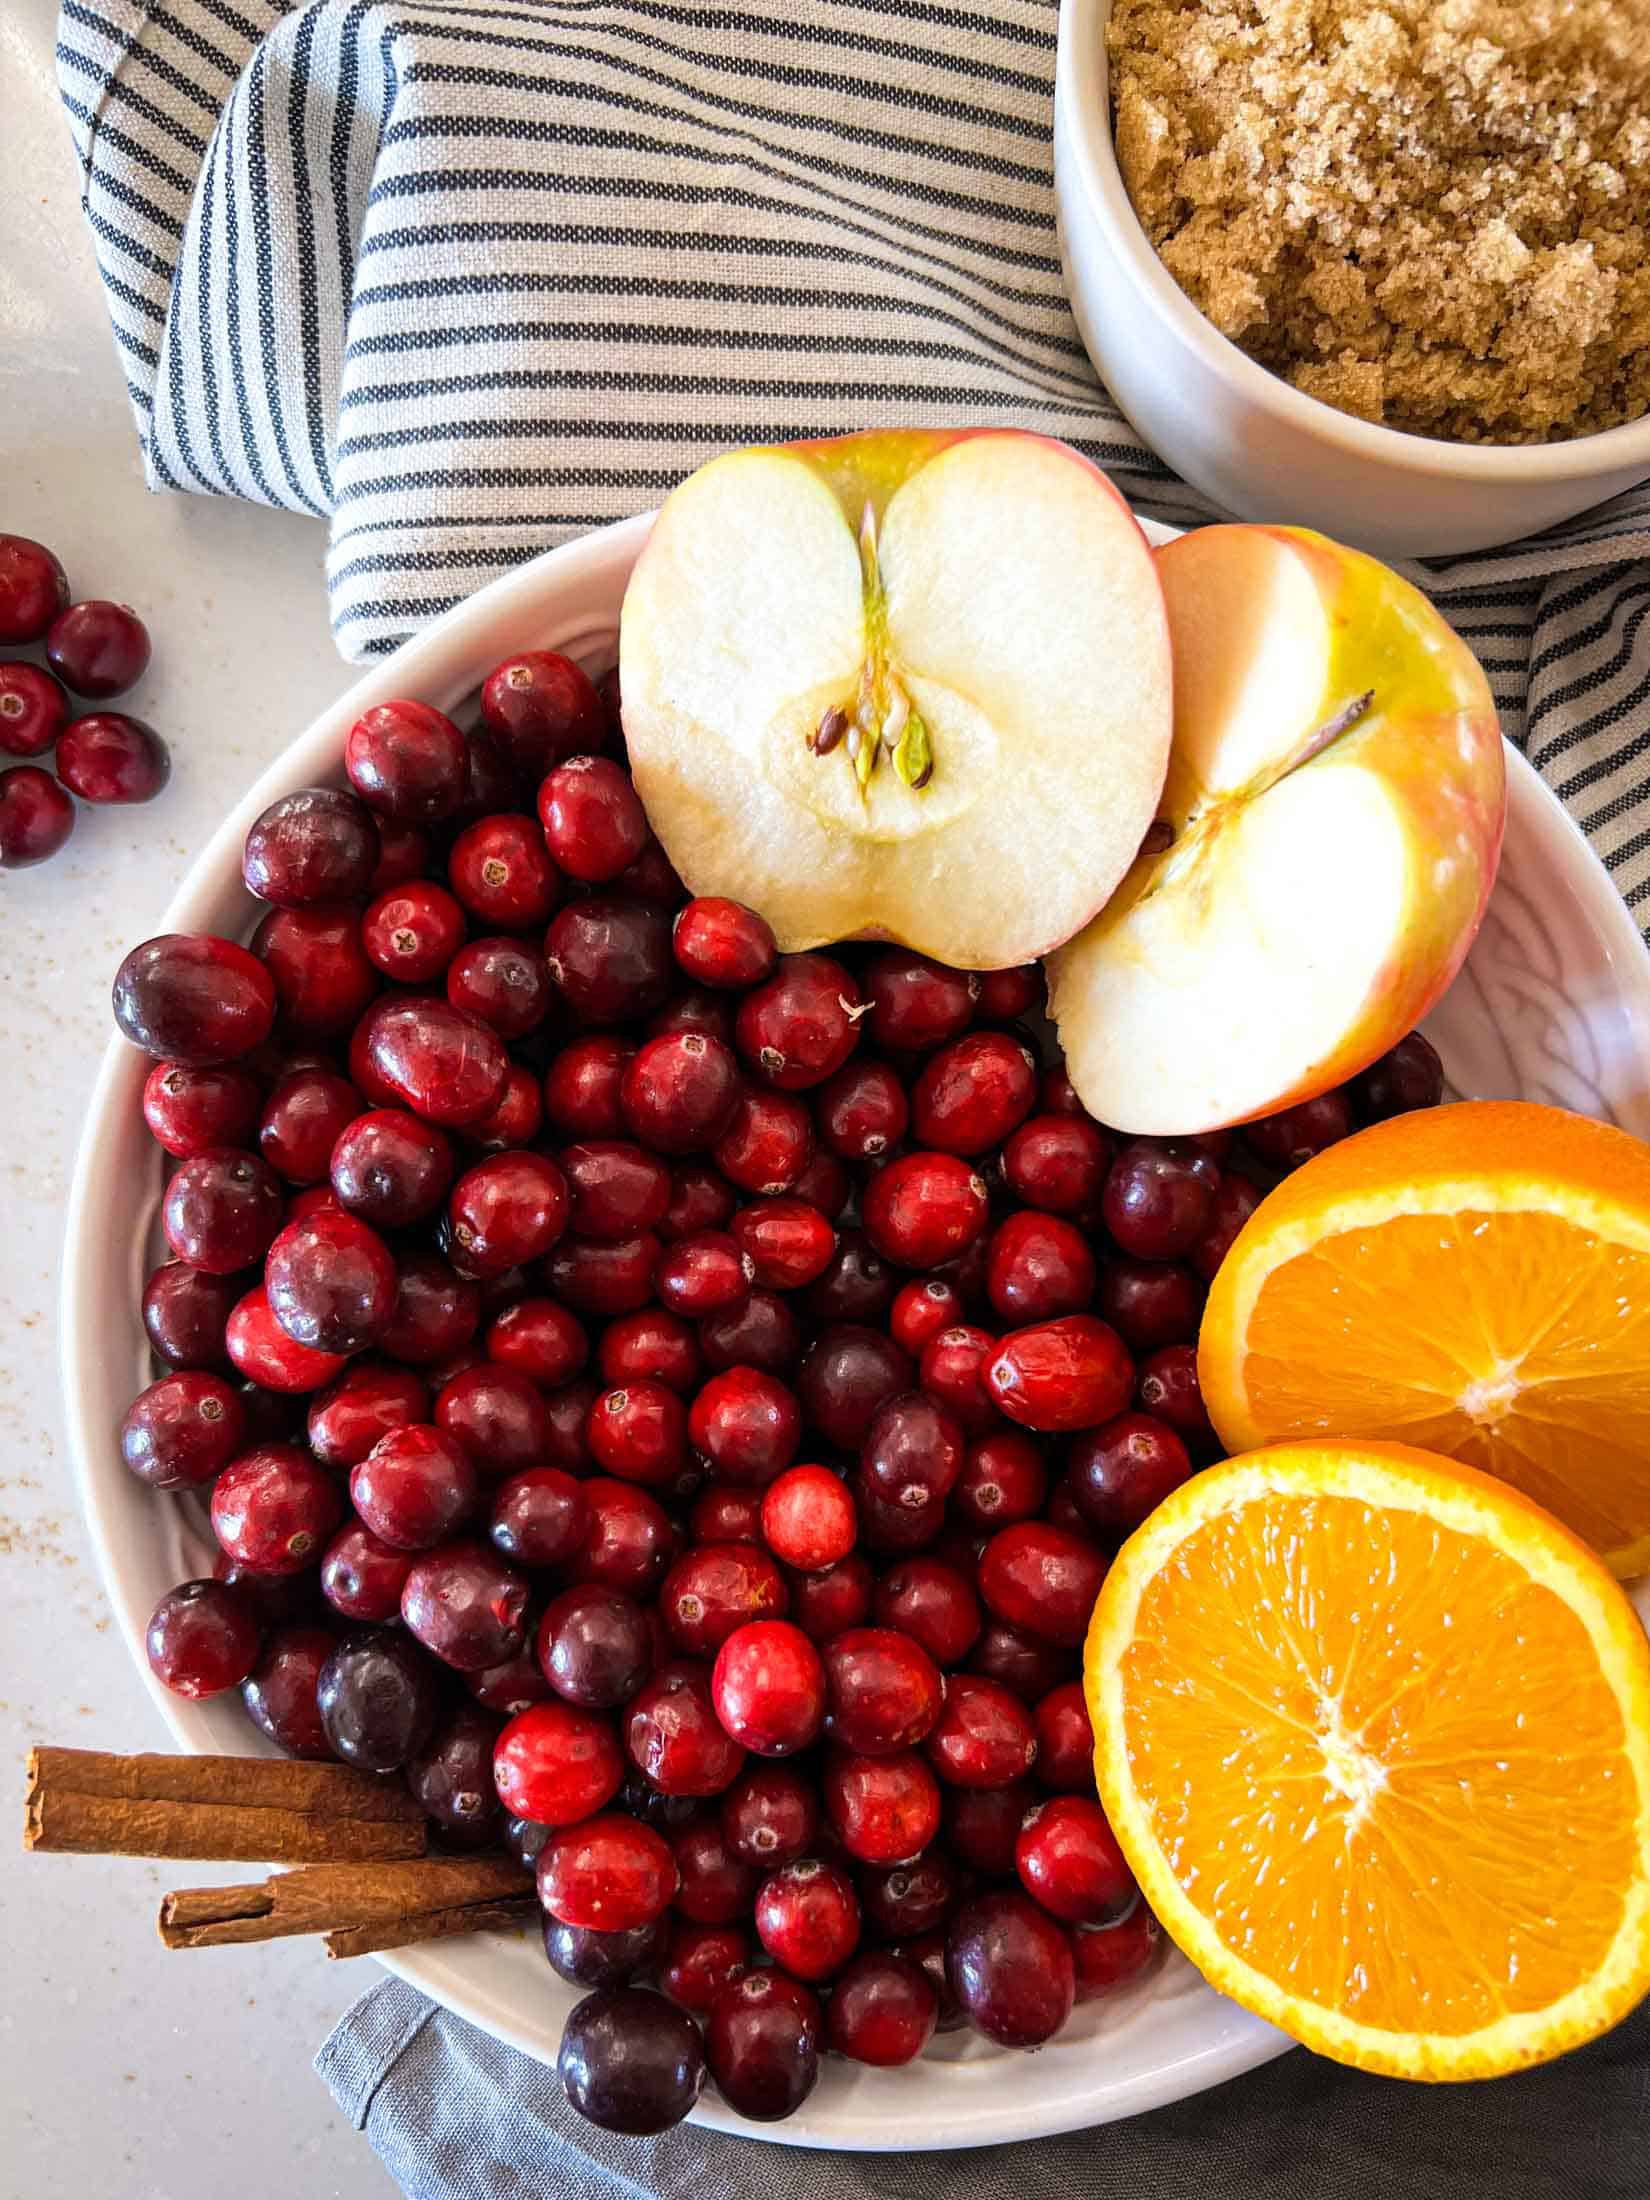 Key ingredients for smoked cranberry sauce including oranges, cranberries, cinnamon, apples, and brown sugar